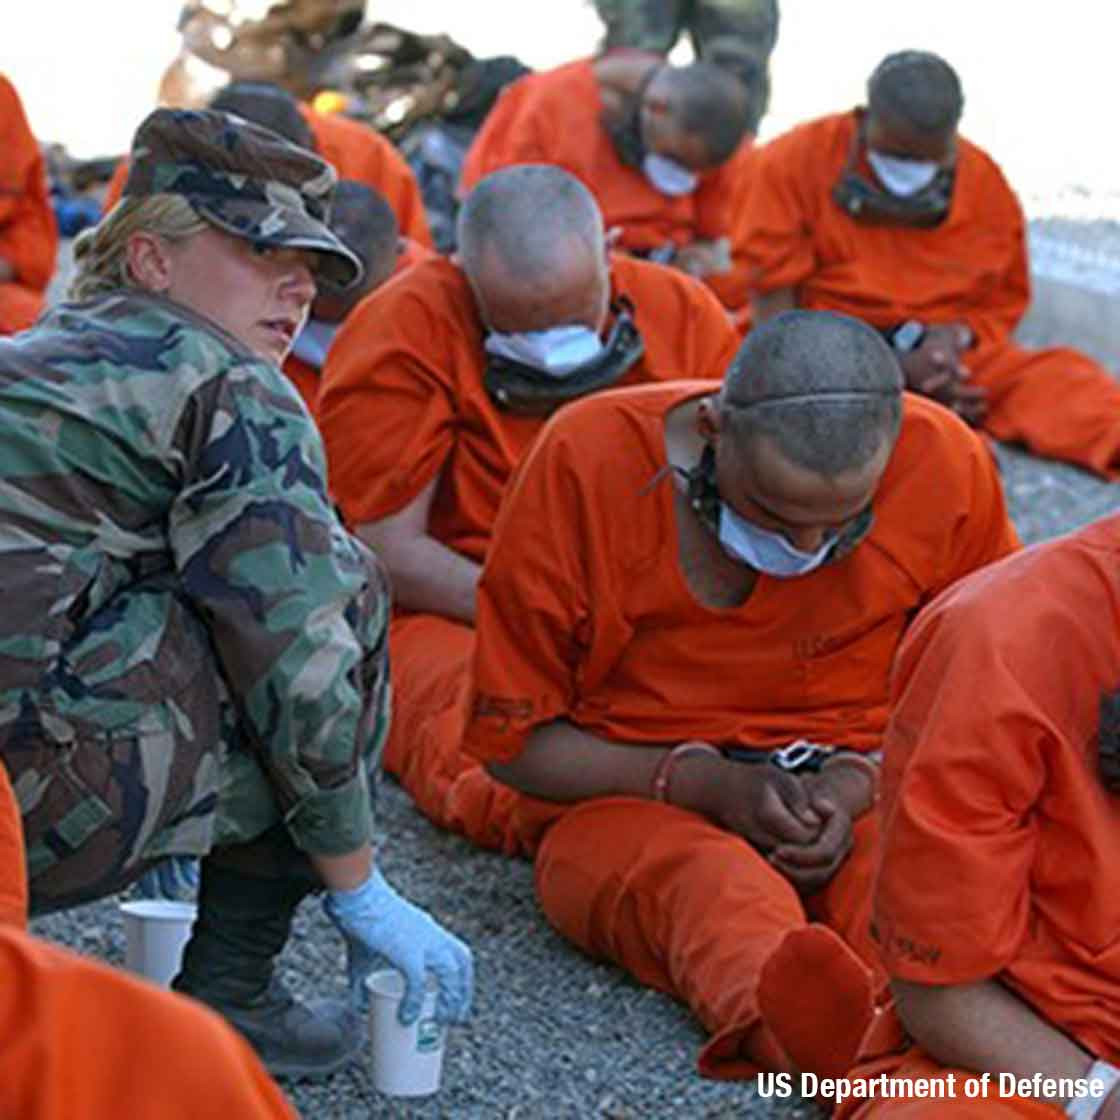 Has Guantanamo made America safer in the post-9/11 world?